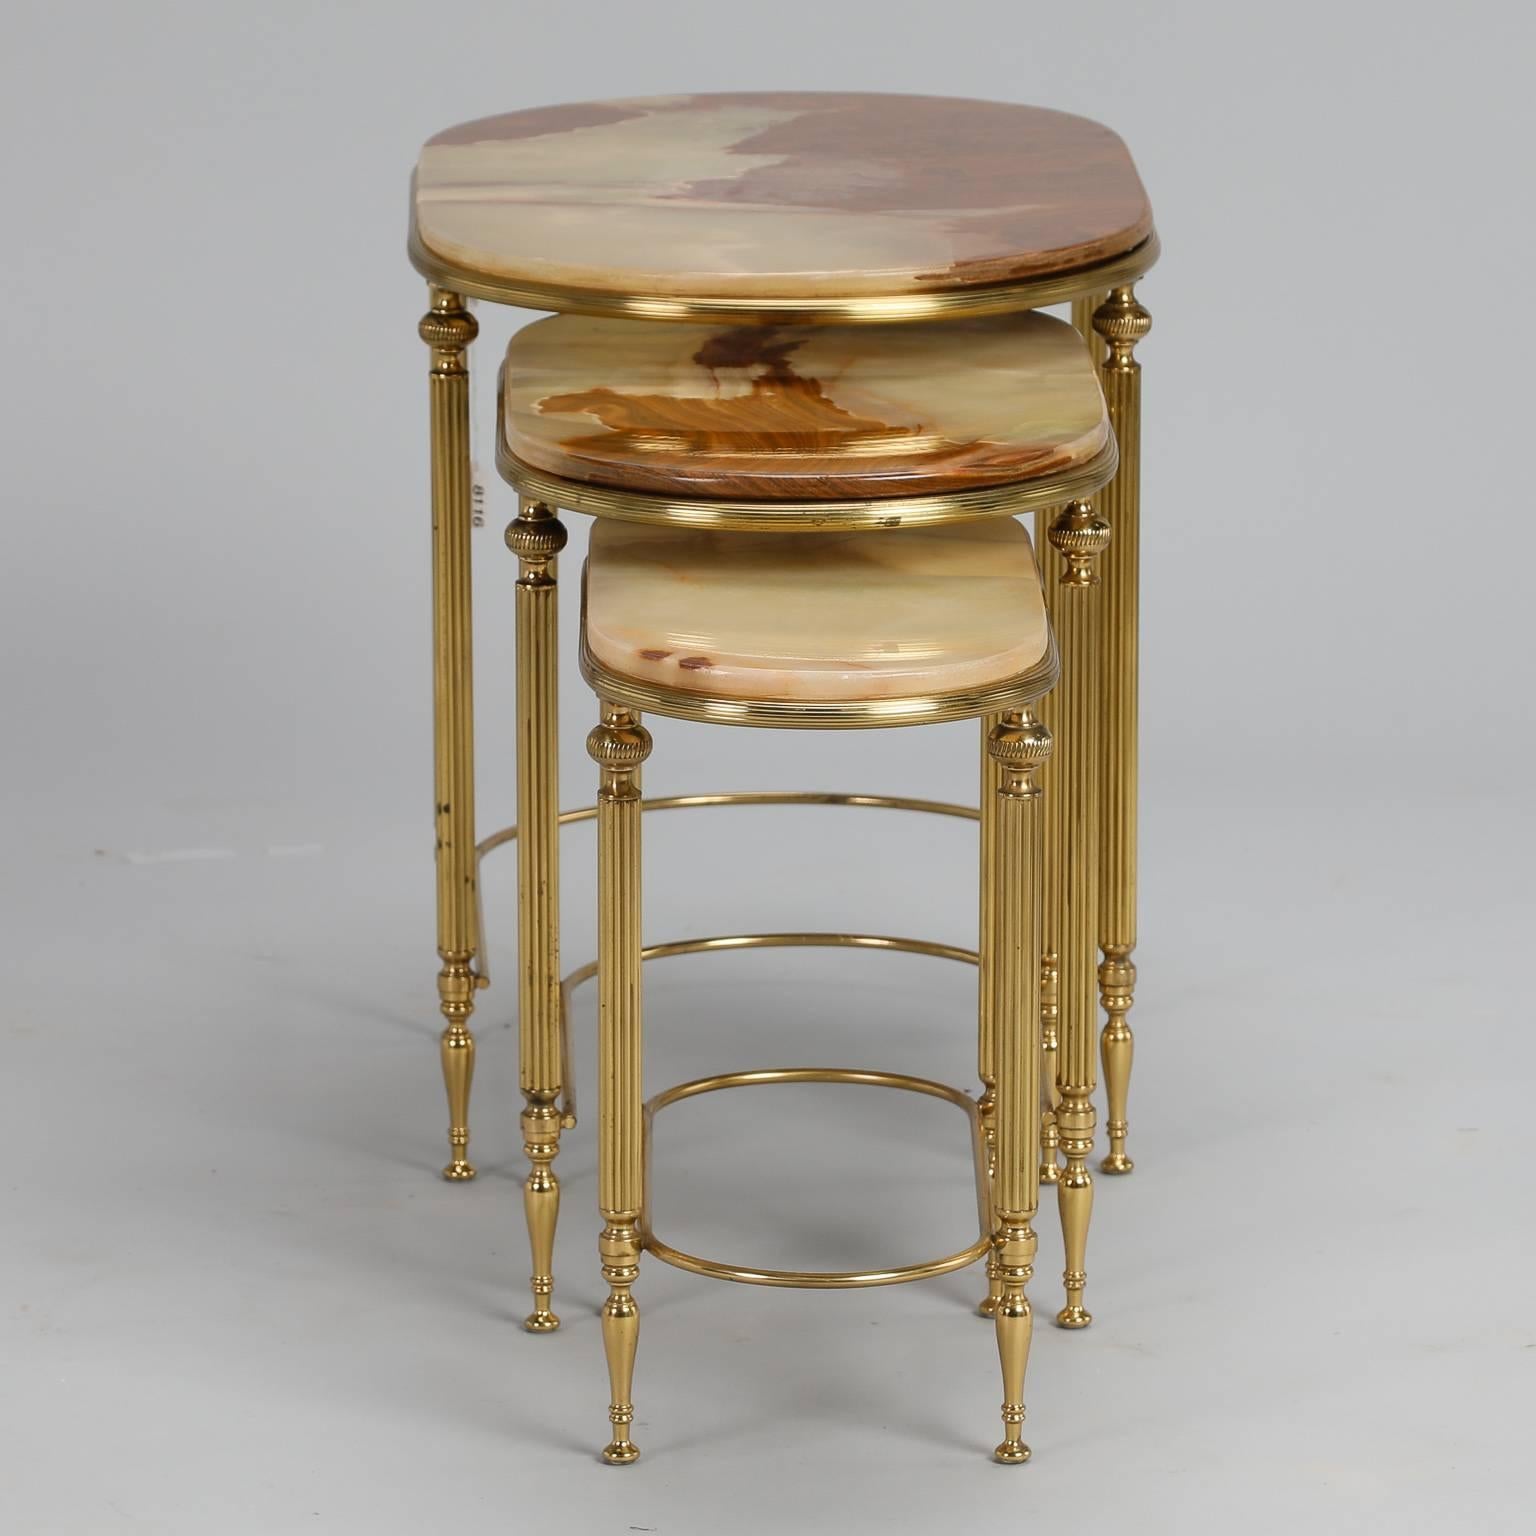 Found in France, circa 1950s trio of oval nesting or stacking tables with brass frames and onyx table tops. Reeded brass legs, beautiful depth and warm amber coloration to onyx. Sold and priced as a set. Dimensions shown are for largest table.